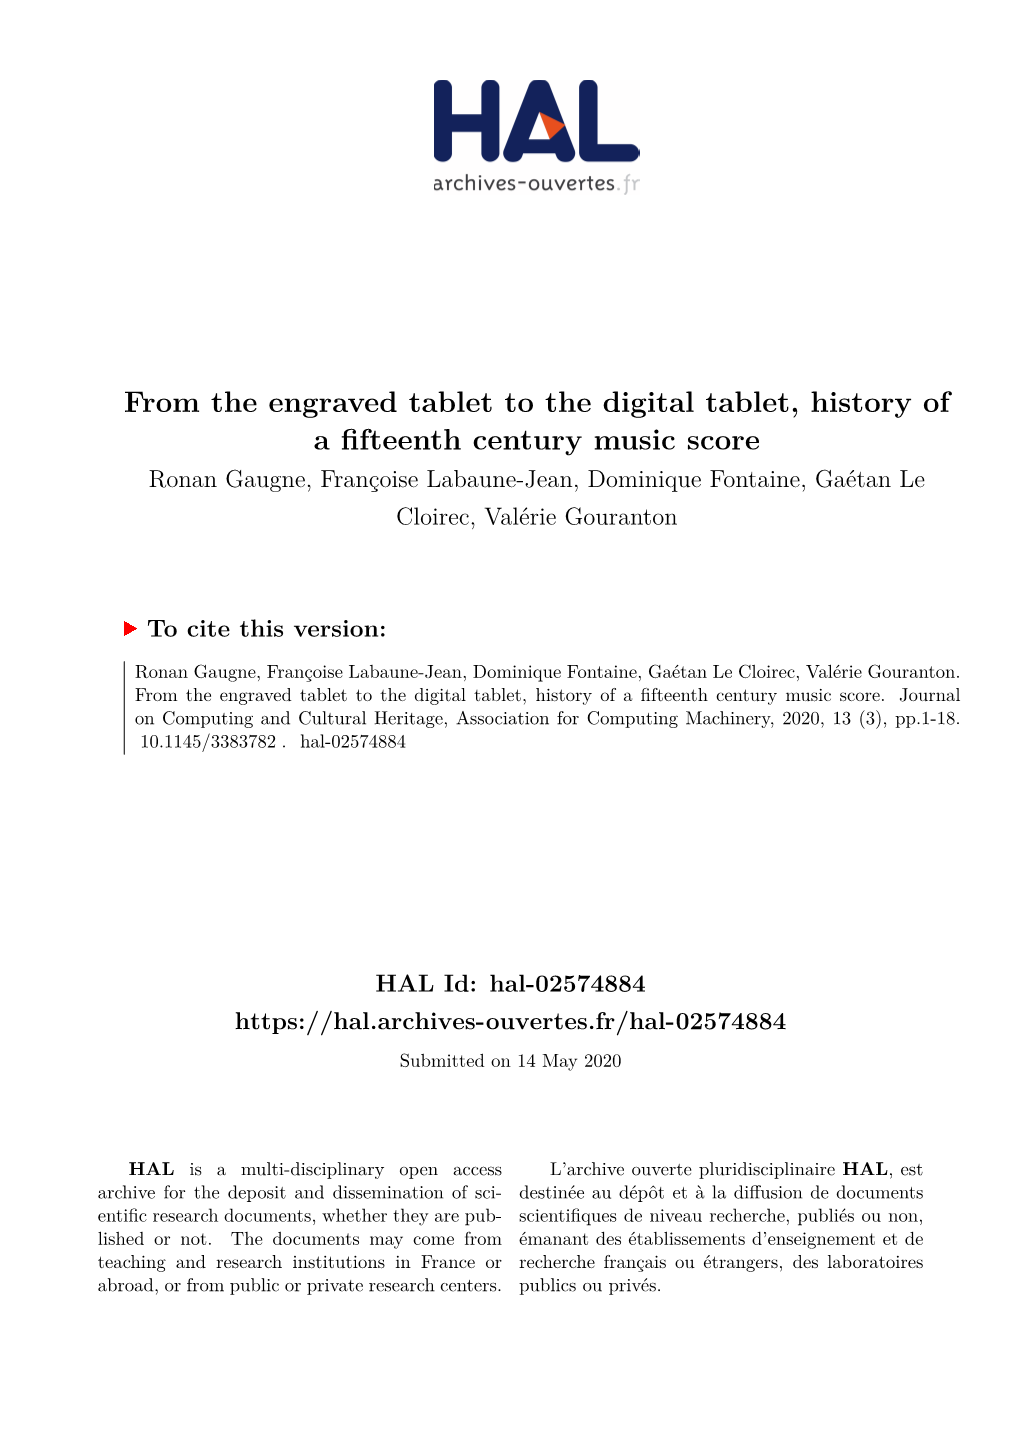 From the Engraved Tablet to the Digital Tablet, History of a Fifteenth Century Music Score